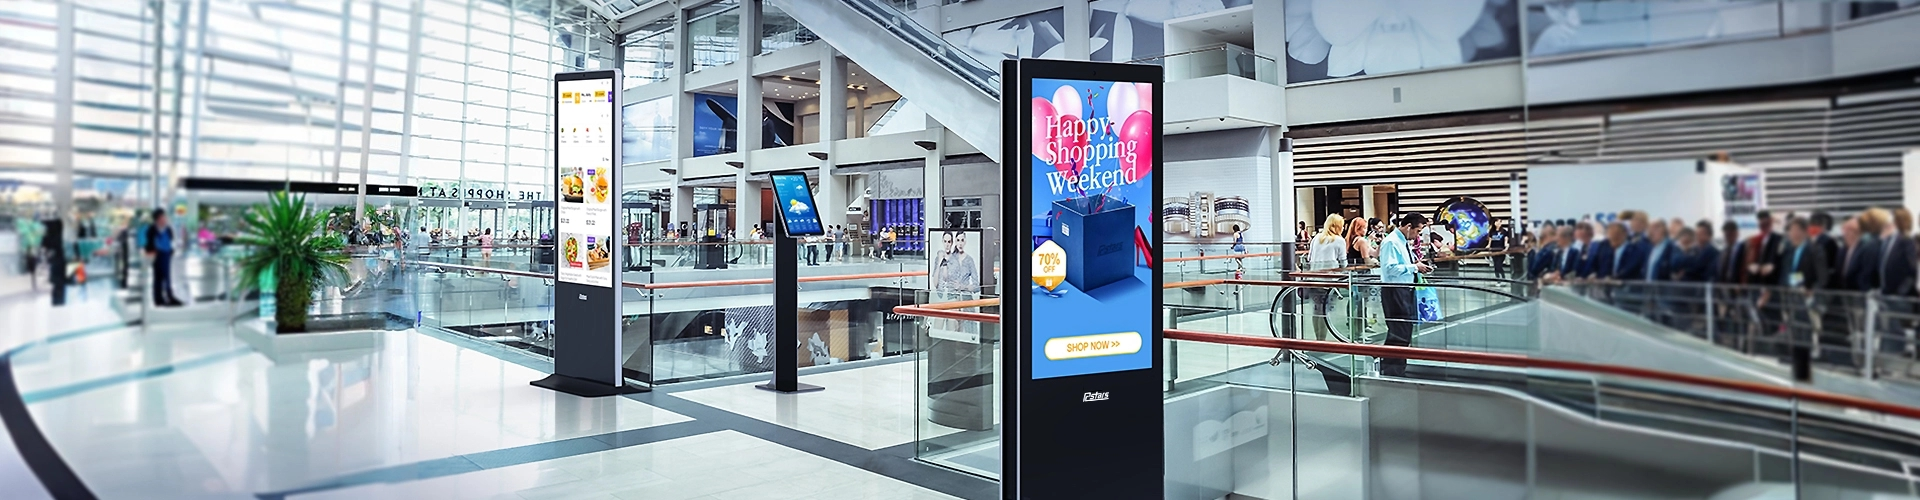 43 inch Freestanding Digital Poster Display for Retail